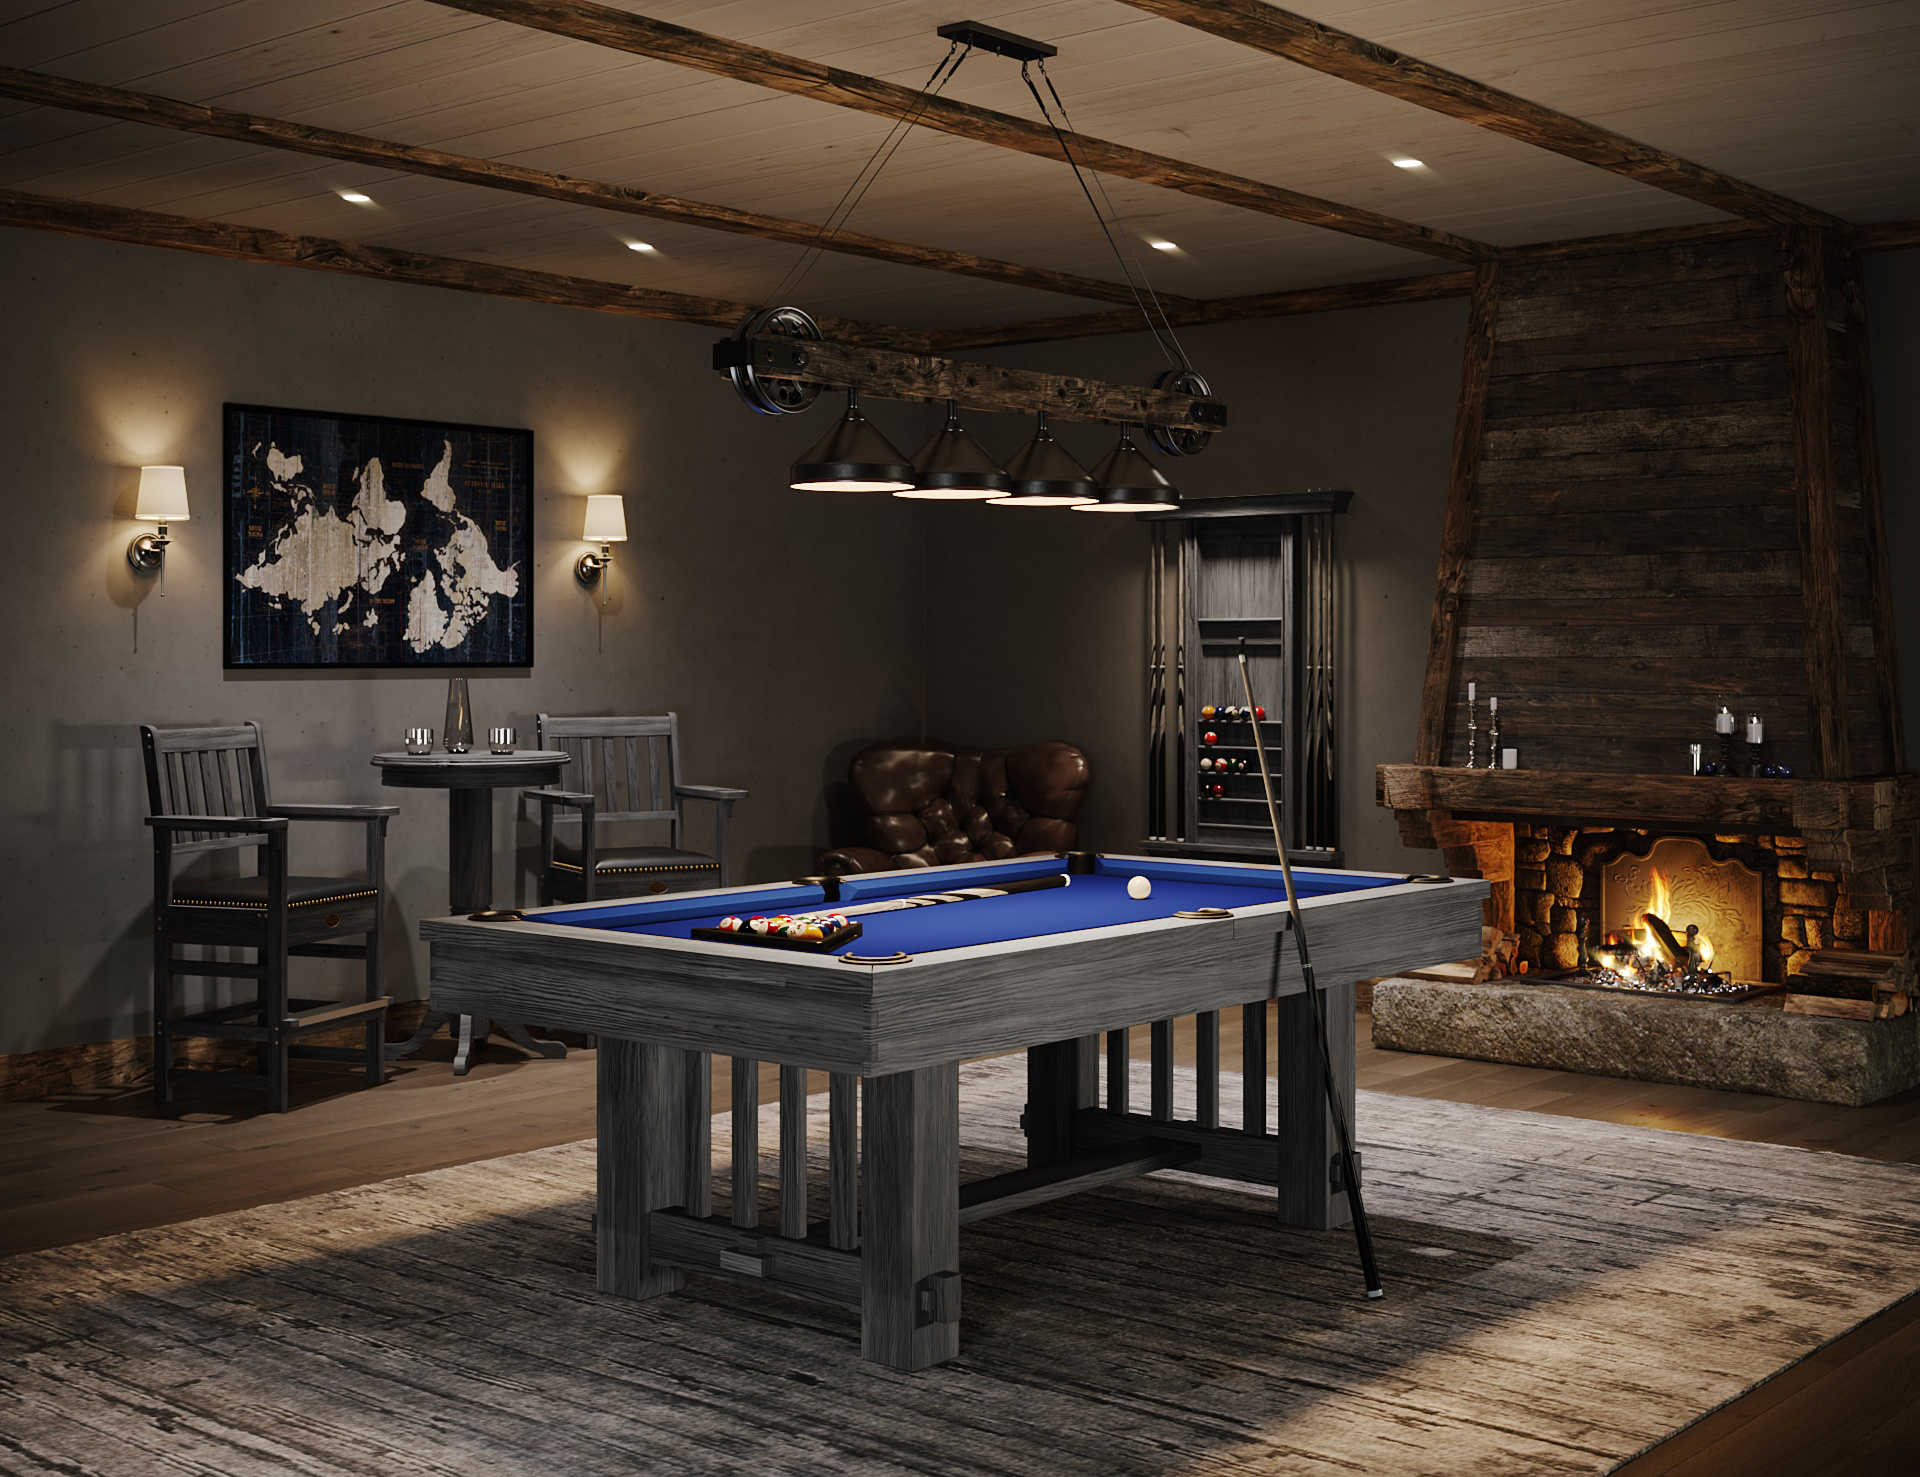 Davis Smith had the unique opportunity to buy back his first business, Pooltables.com. Here's what he plans to do after re-acquiring.